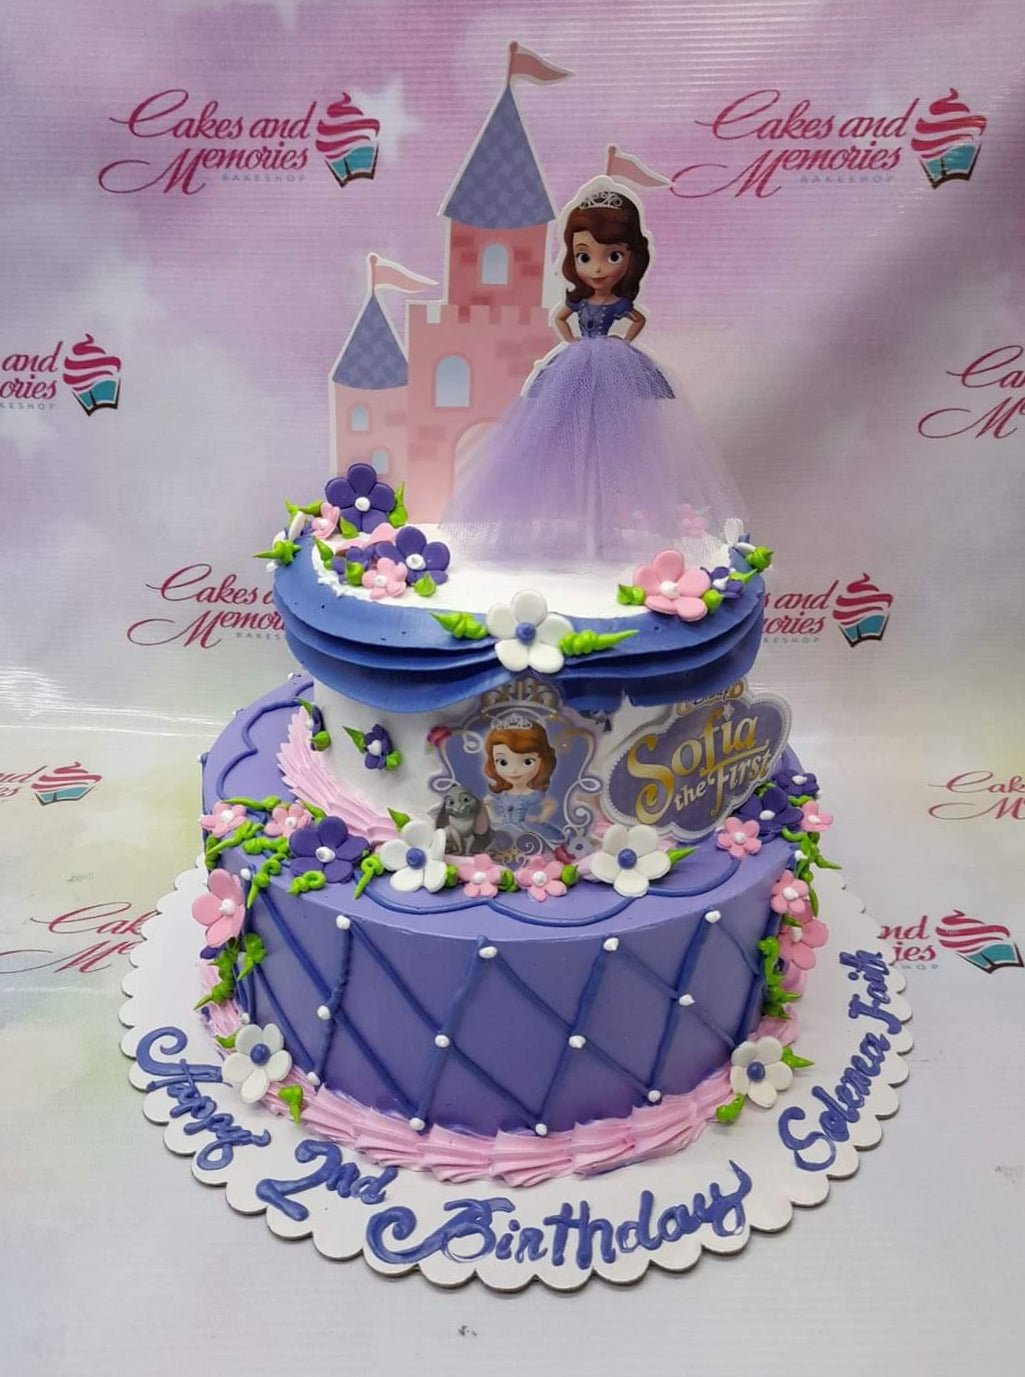 Kids and Character Cake-Sofia the First Springtime in Enchancia #43885 -  Aggie's Bakery & Cake Shop